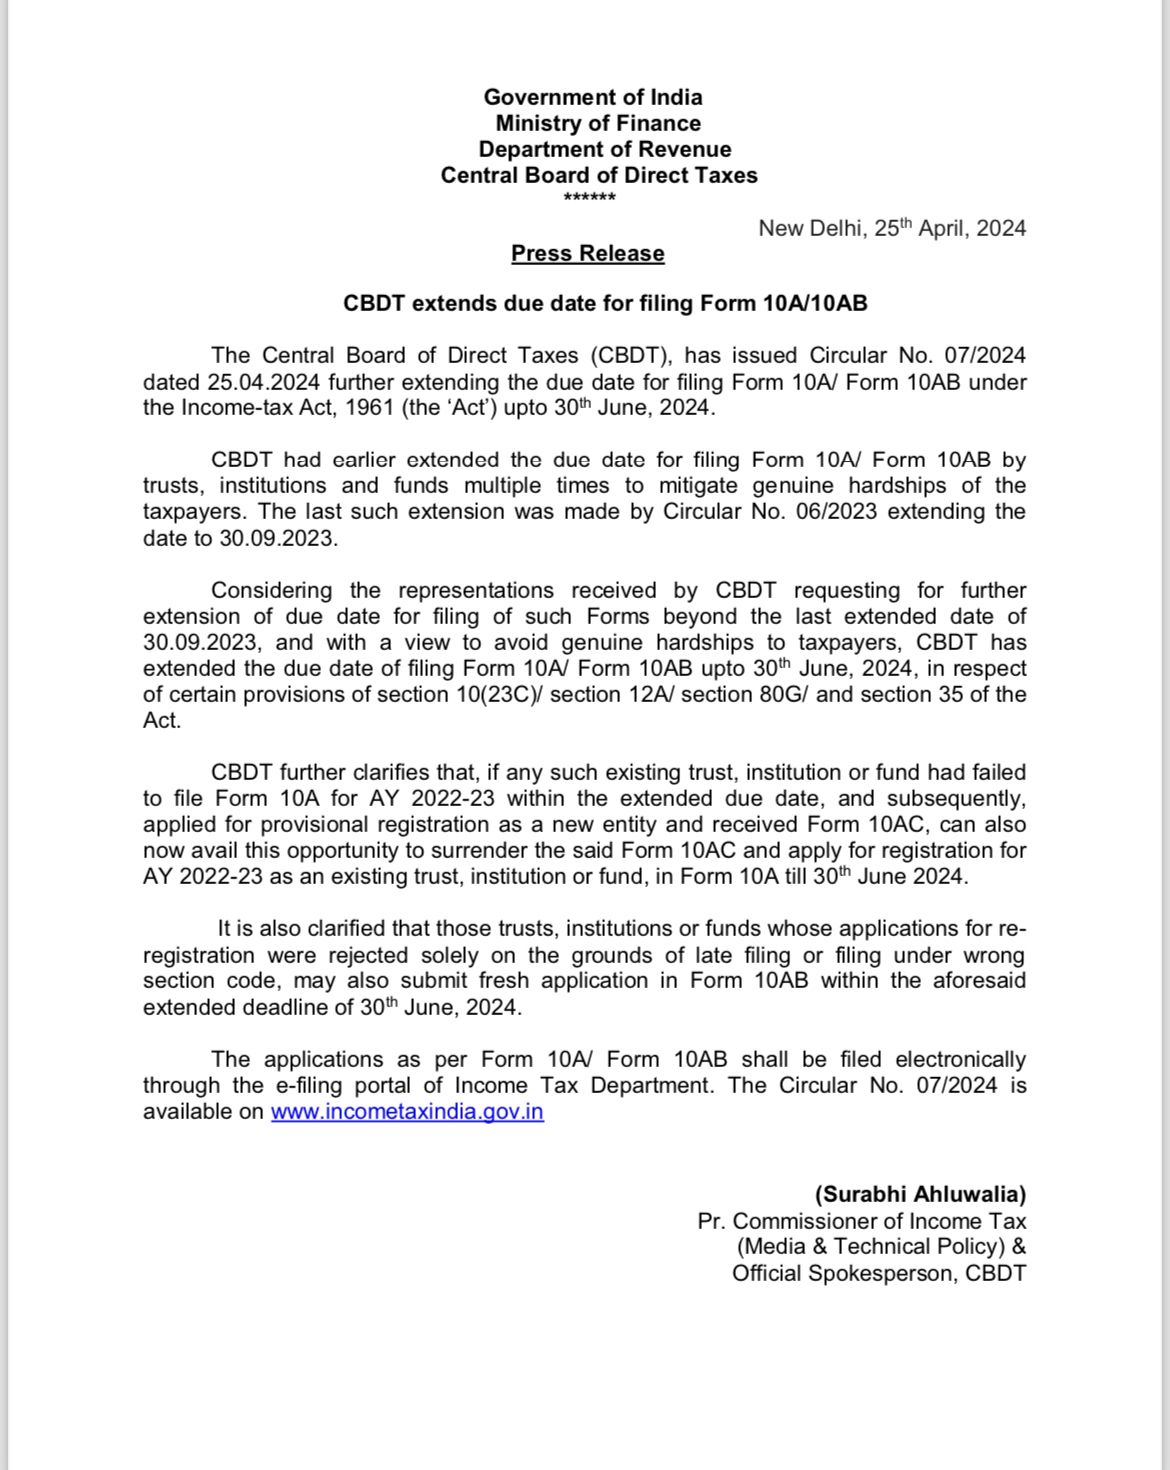 Circular No. 7 2024 dated 25 april 2024 issued